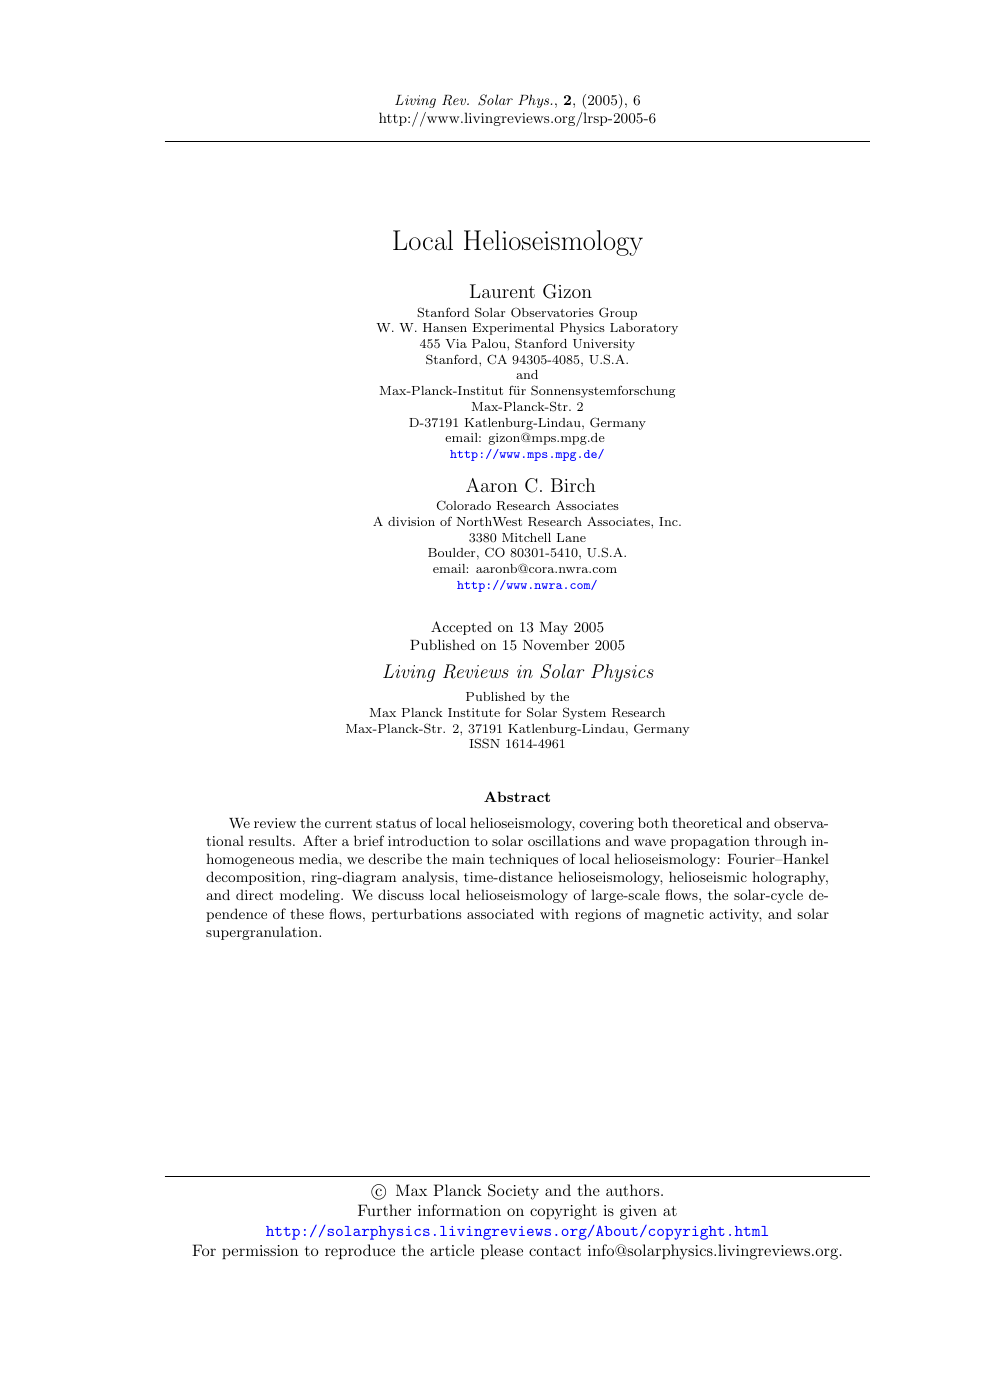 Local Helioseismology Topic Of Research Paper In Earth And Related Environmental Sciences Download Scholarly Article Pdf And Read For Free On Cyberleninka Open Science Hub